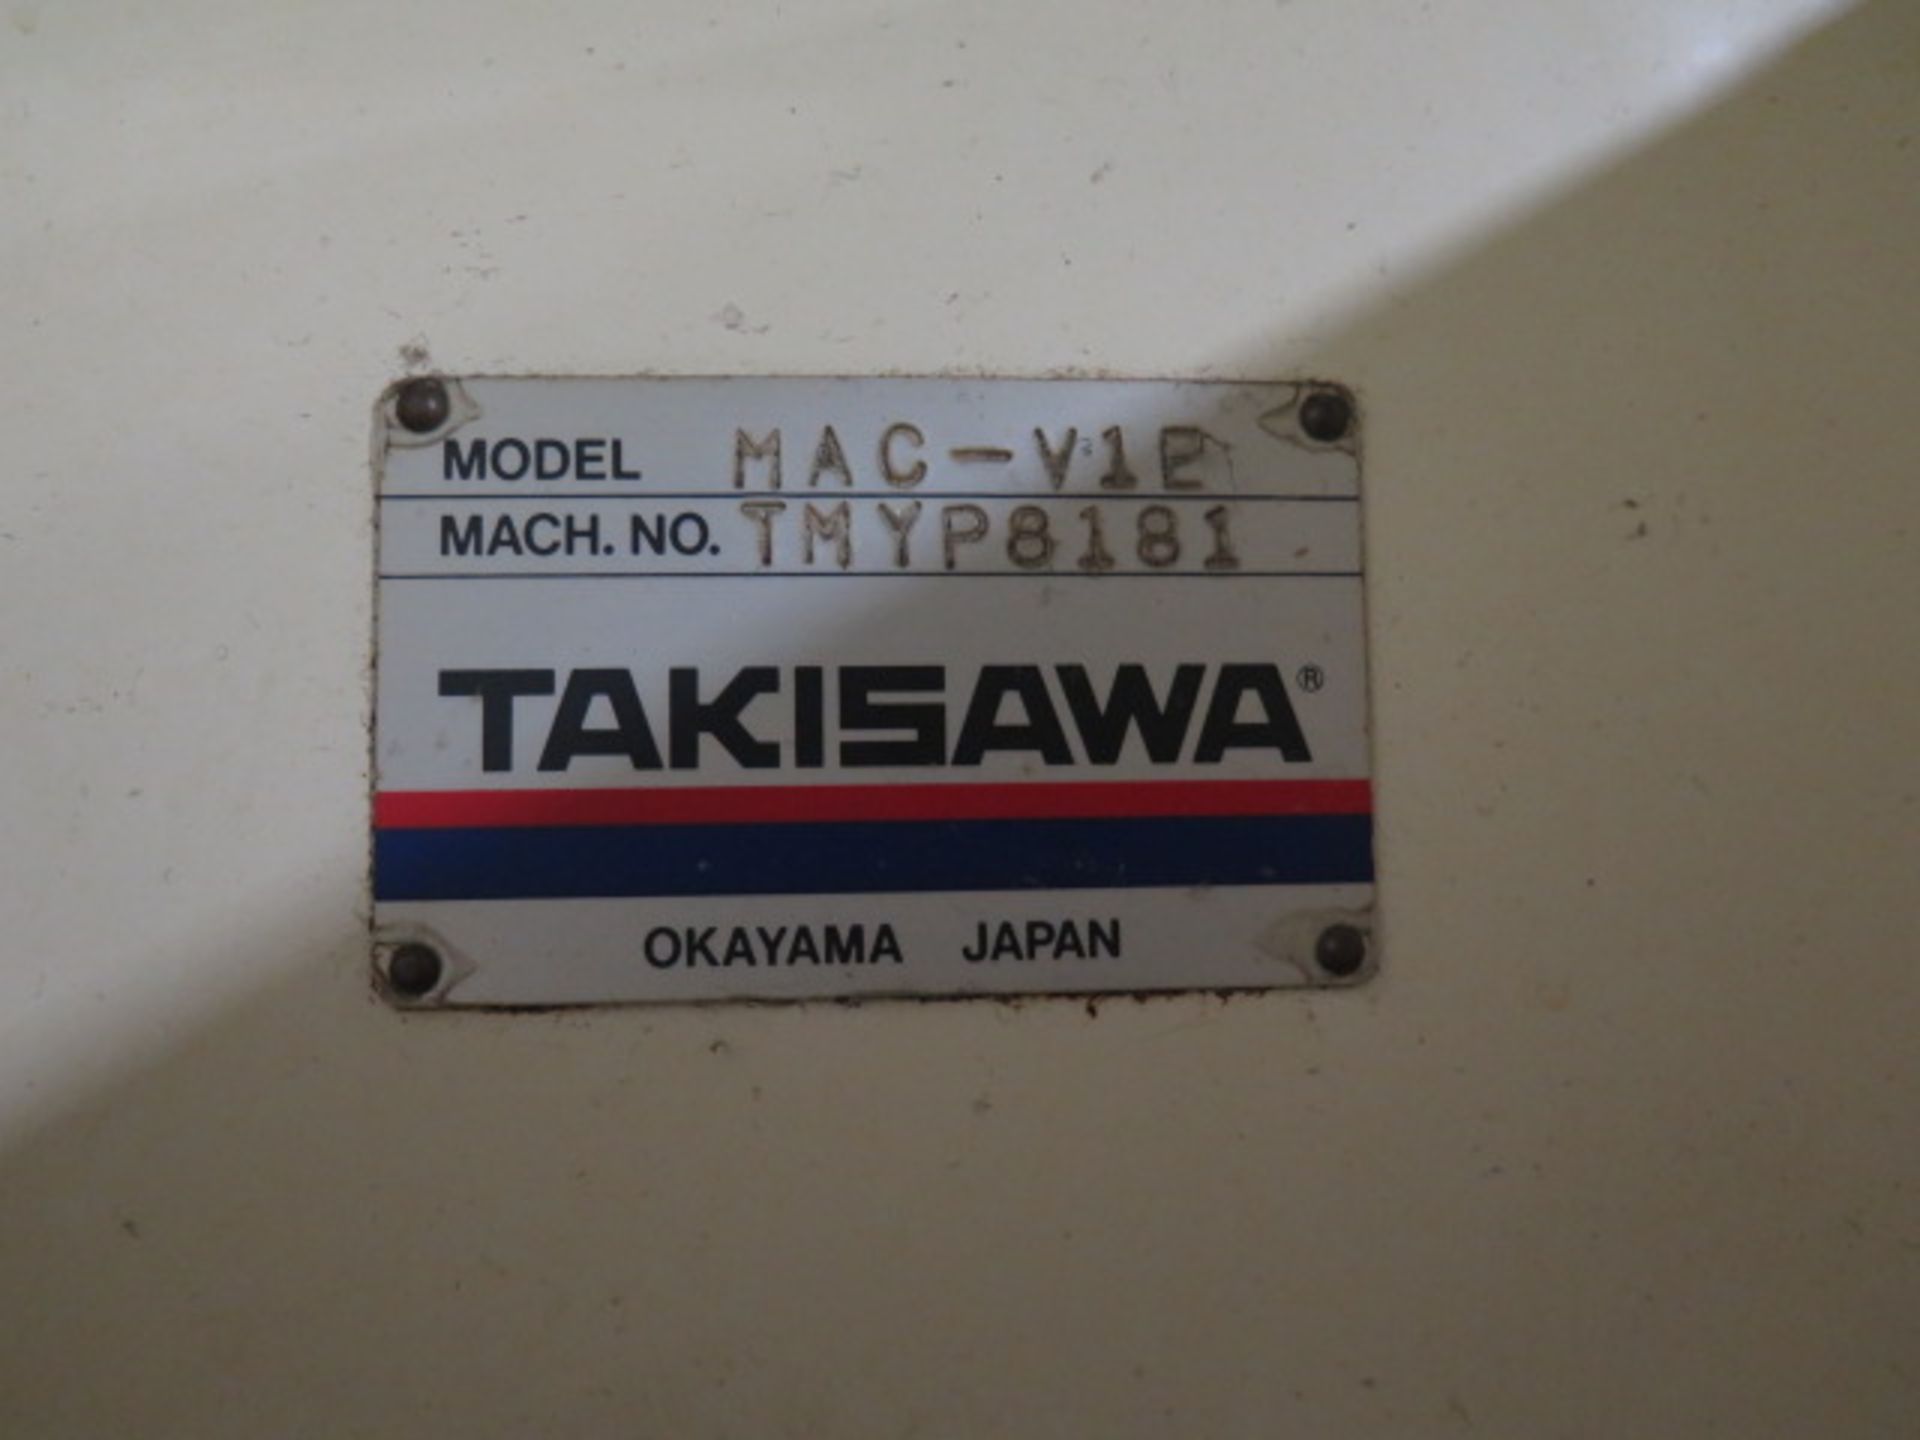 Takisawa MAC-V1E CNC Drilling/Tapping Center s/n TMYP8181 (X AXIS MOTOR MAKING NOISE), SOLD AS IS - Image 19 of 19